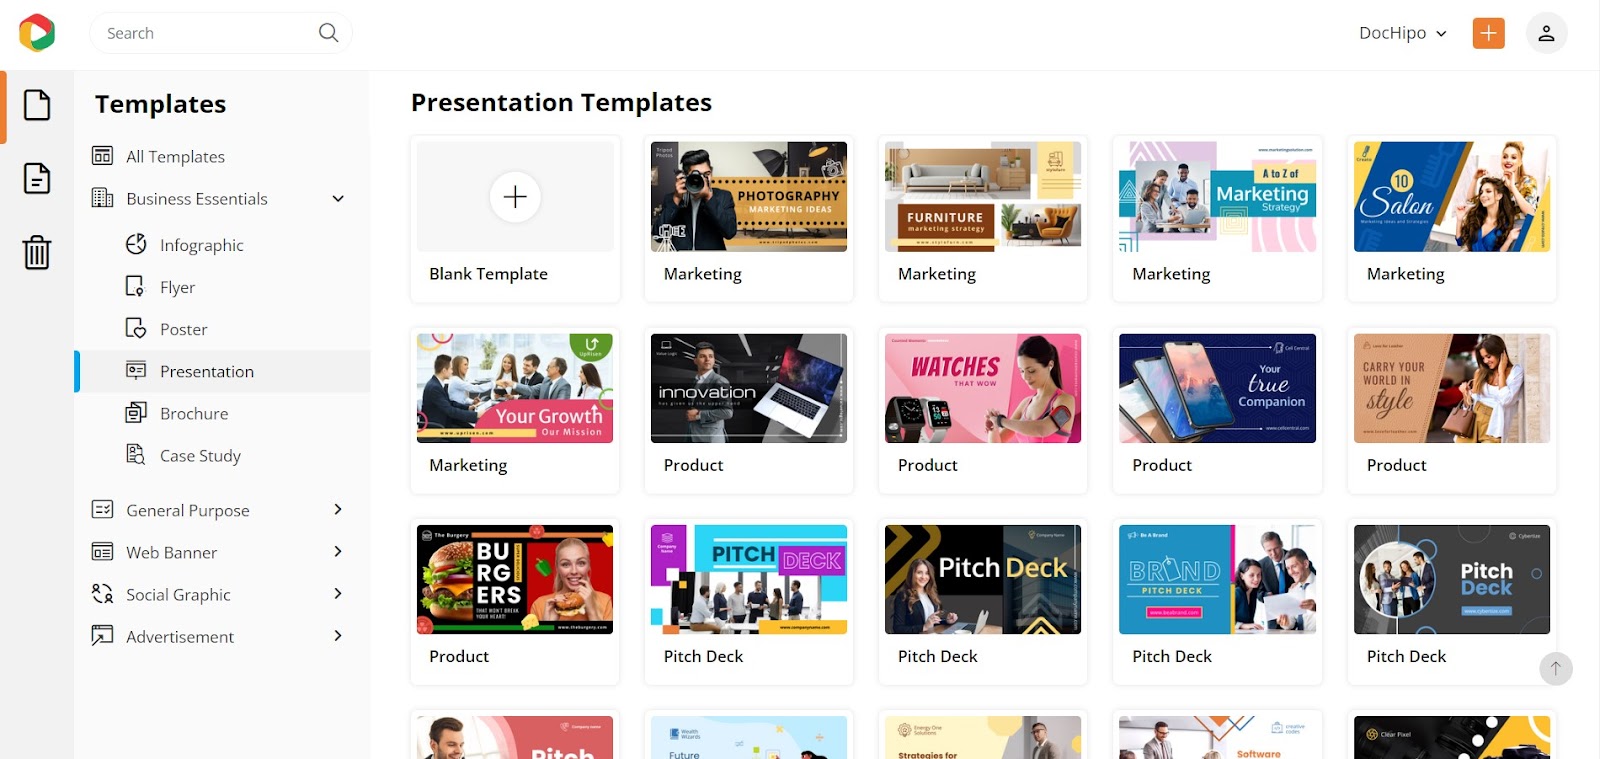 DocHipo Presentation Templates from the best presentation software